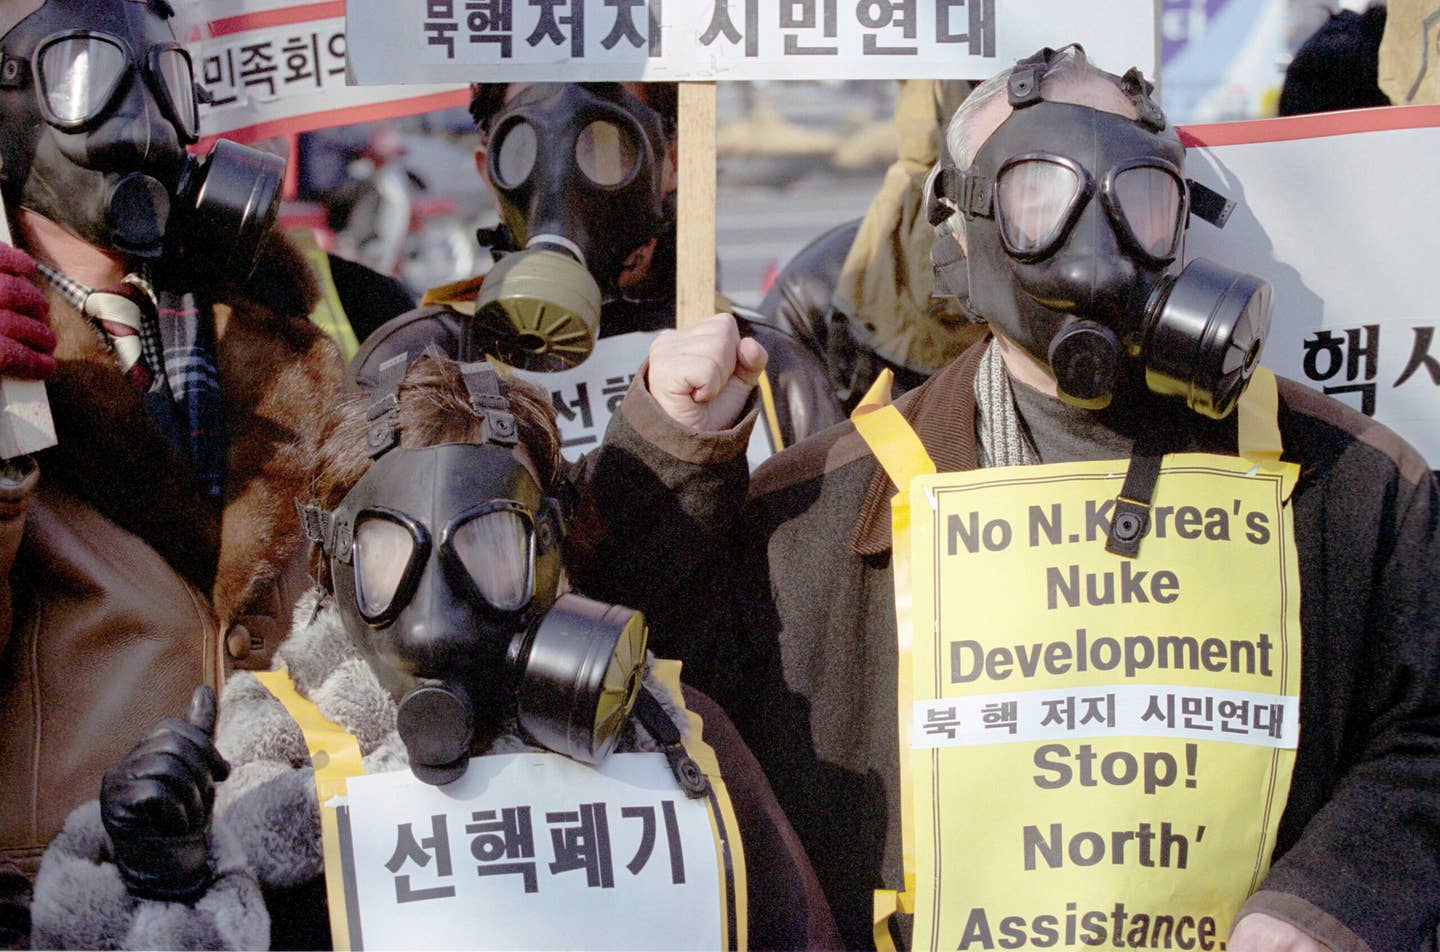 South Korean protesters during a rally in Seoul, January 2003. The protestors were demanding that North Korea abandon its nuclear weapons development program and also criticized the North Korean withdrawal from the Nuclear Nonproliferation Treaty (NPT). <em>Photo by Seung-il Ryu/NurPhoto via Getty Images</em>